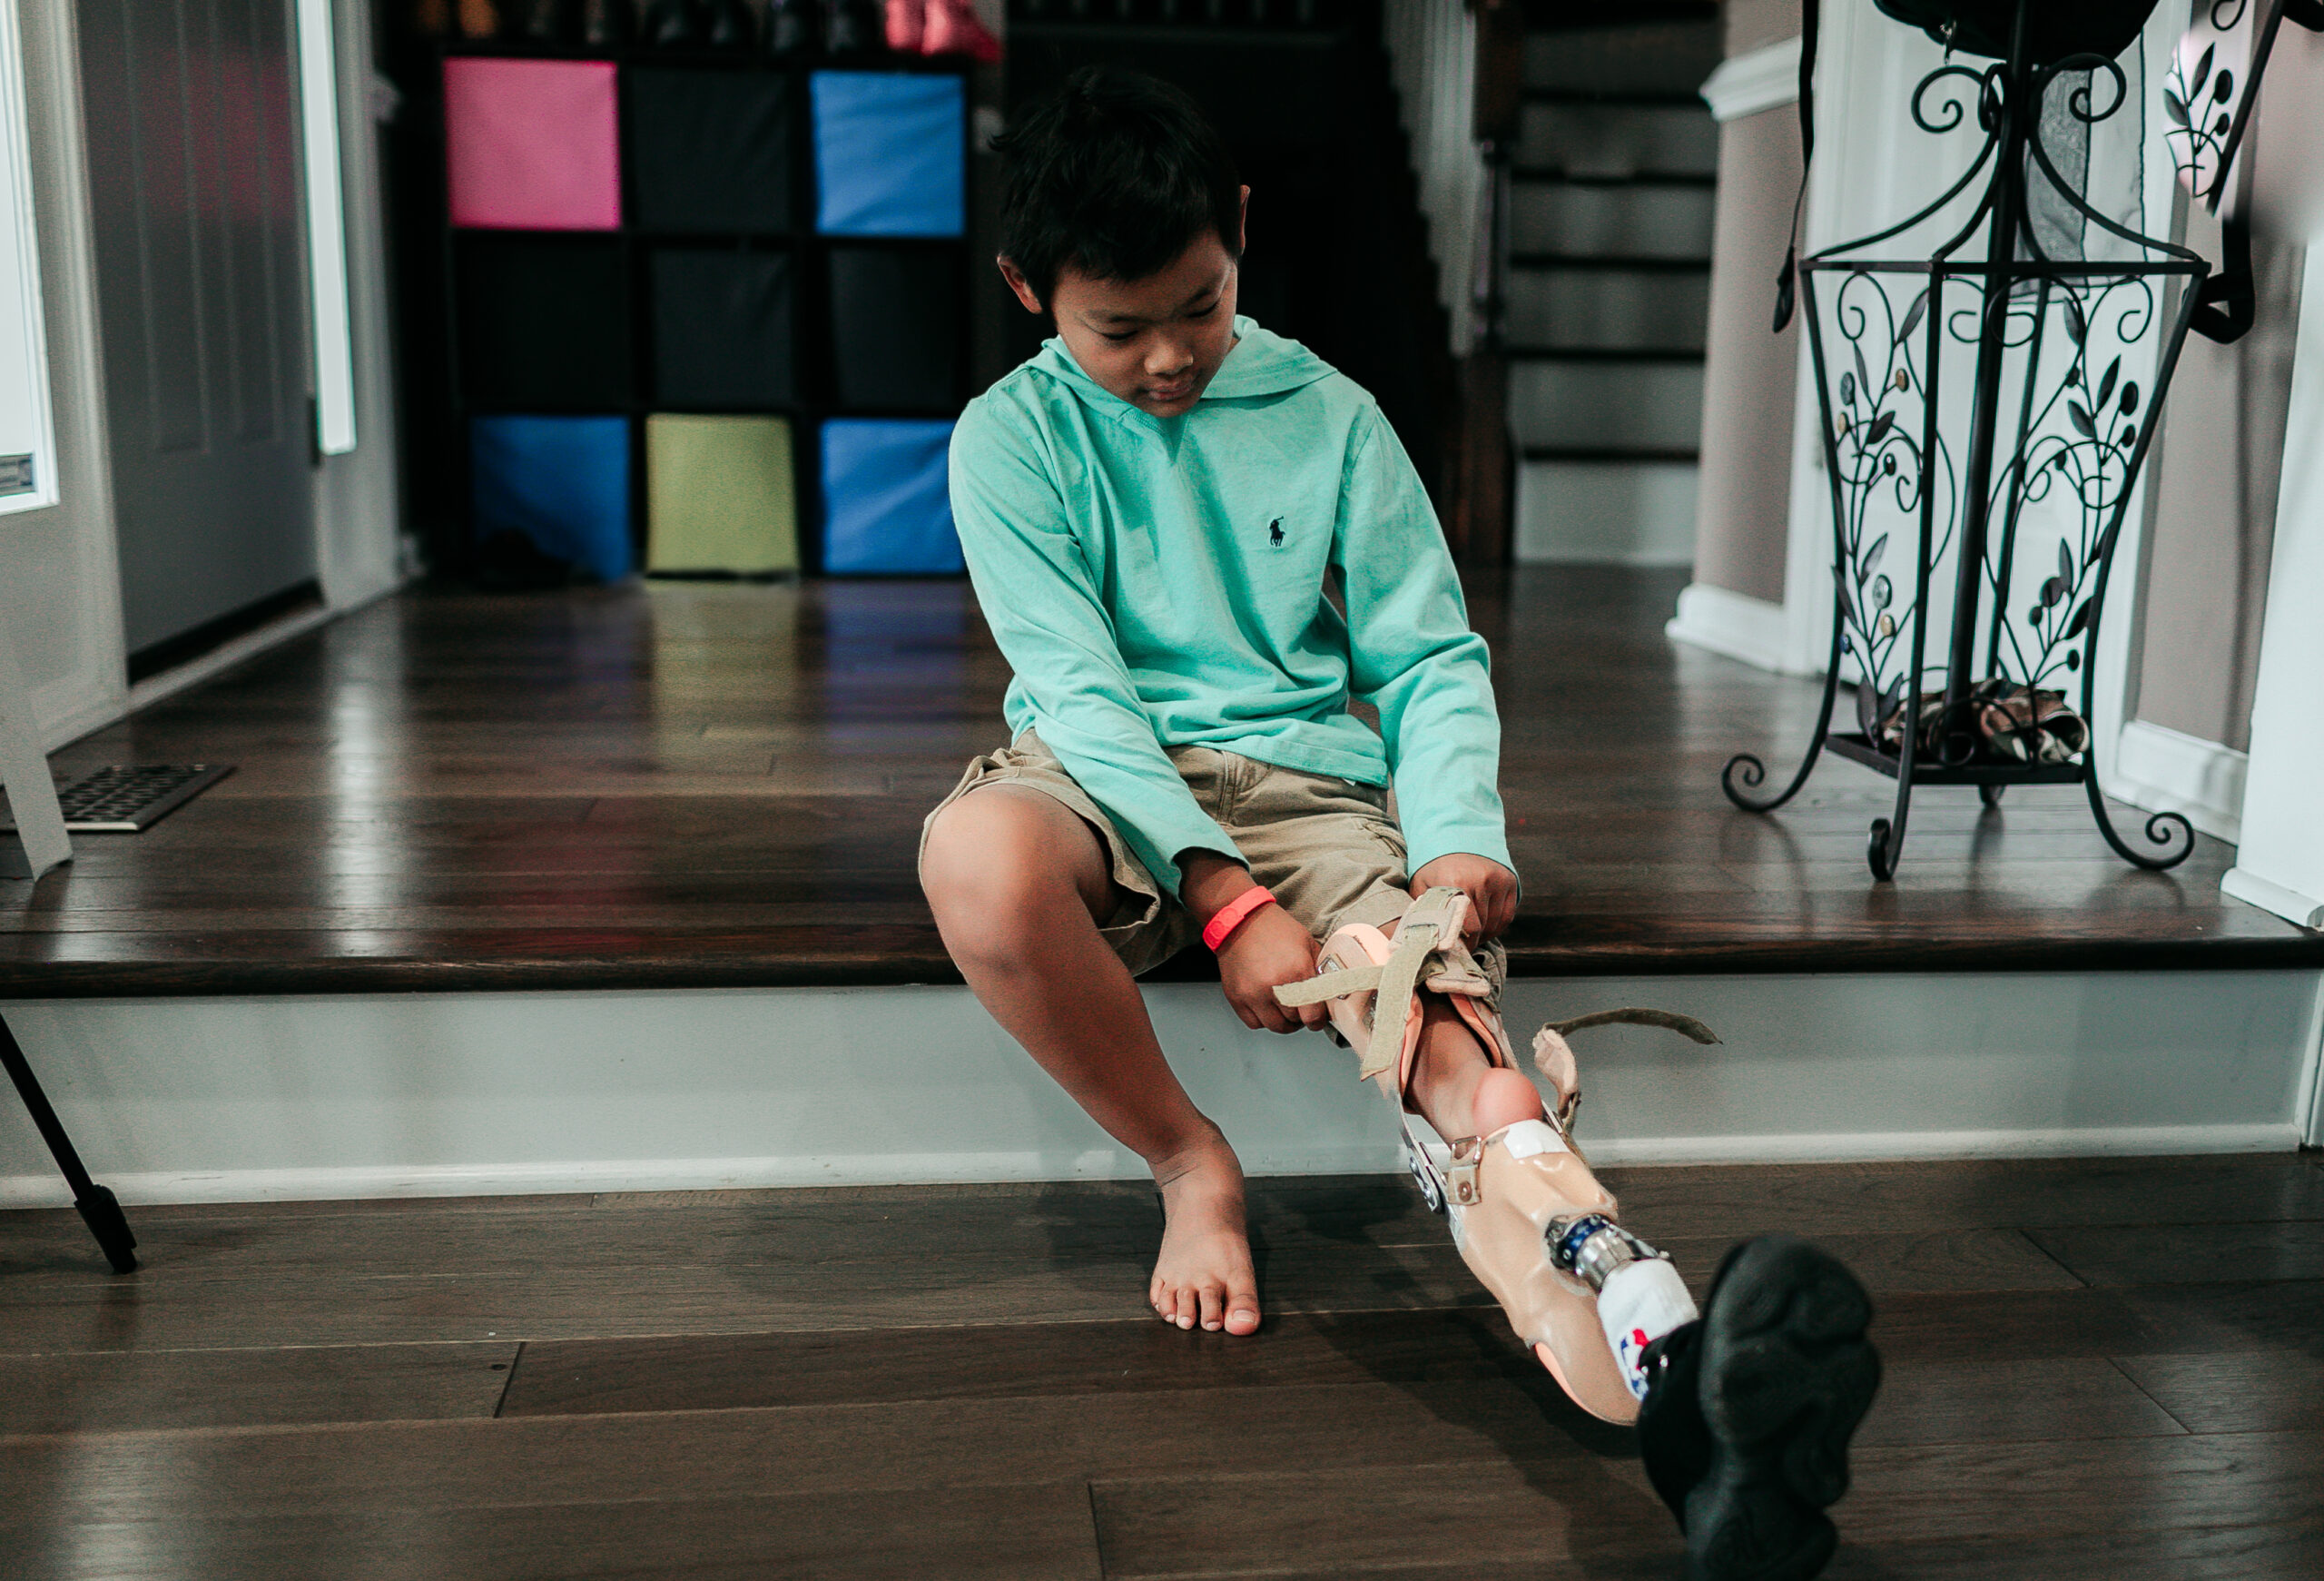 A boy sits on the steps he is putting on a prosthetic leg